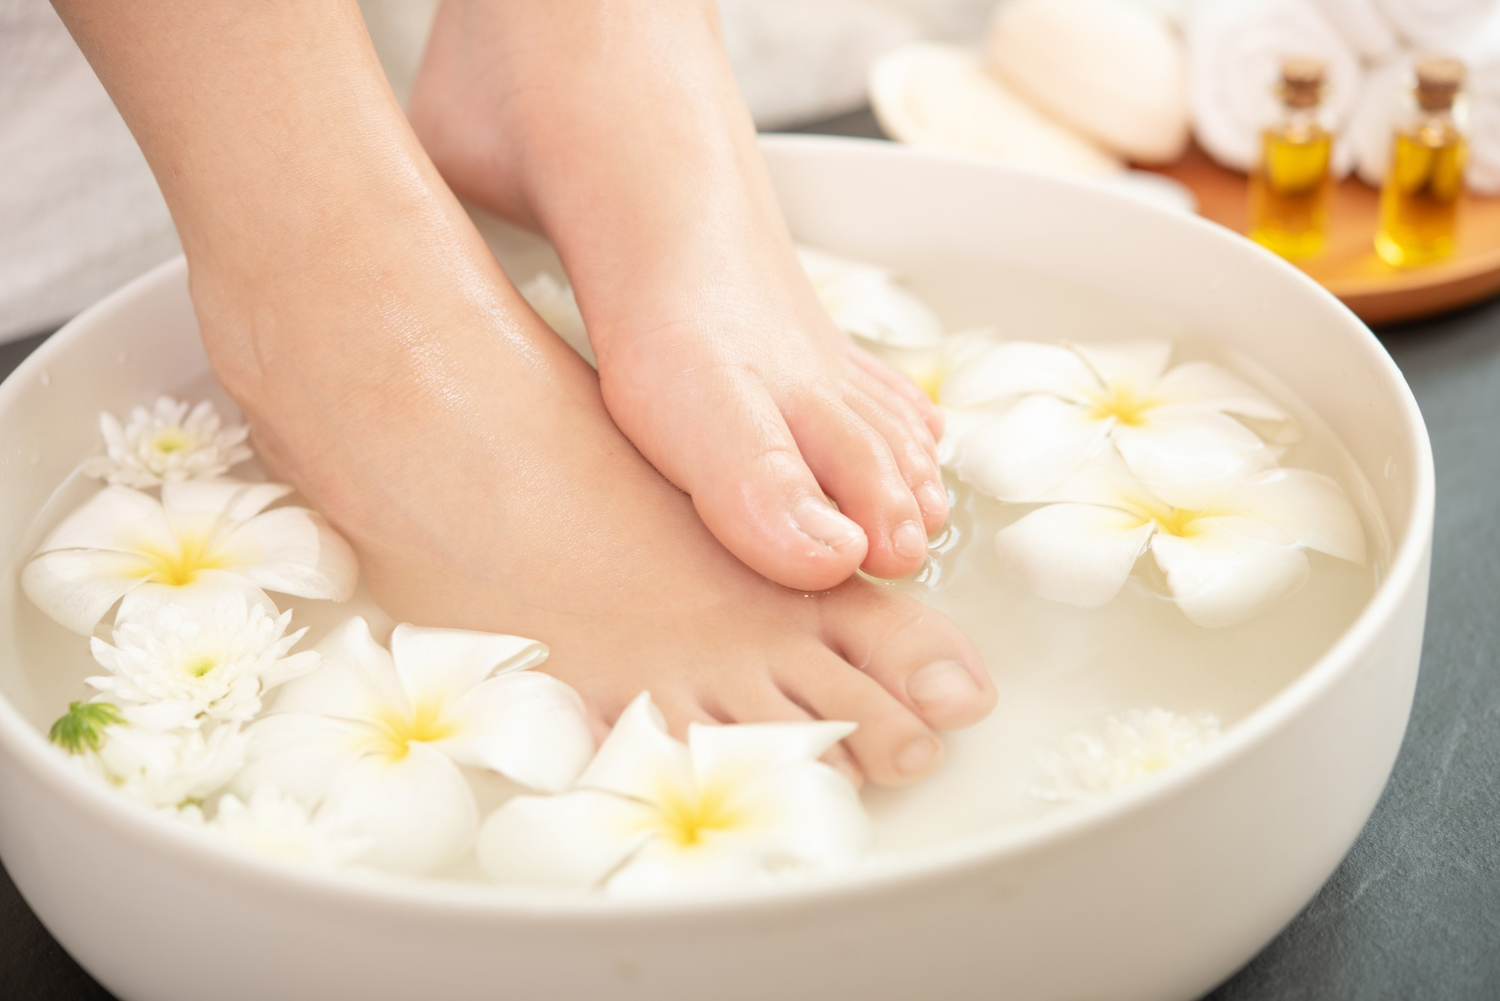 What Are The Different Types Of Pedicures, And Which Is Best?